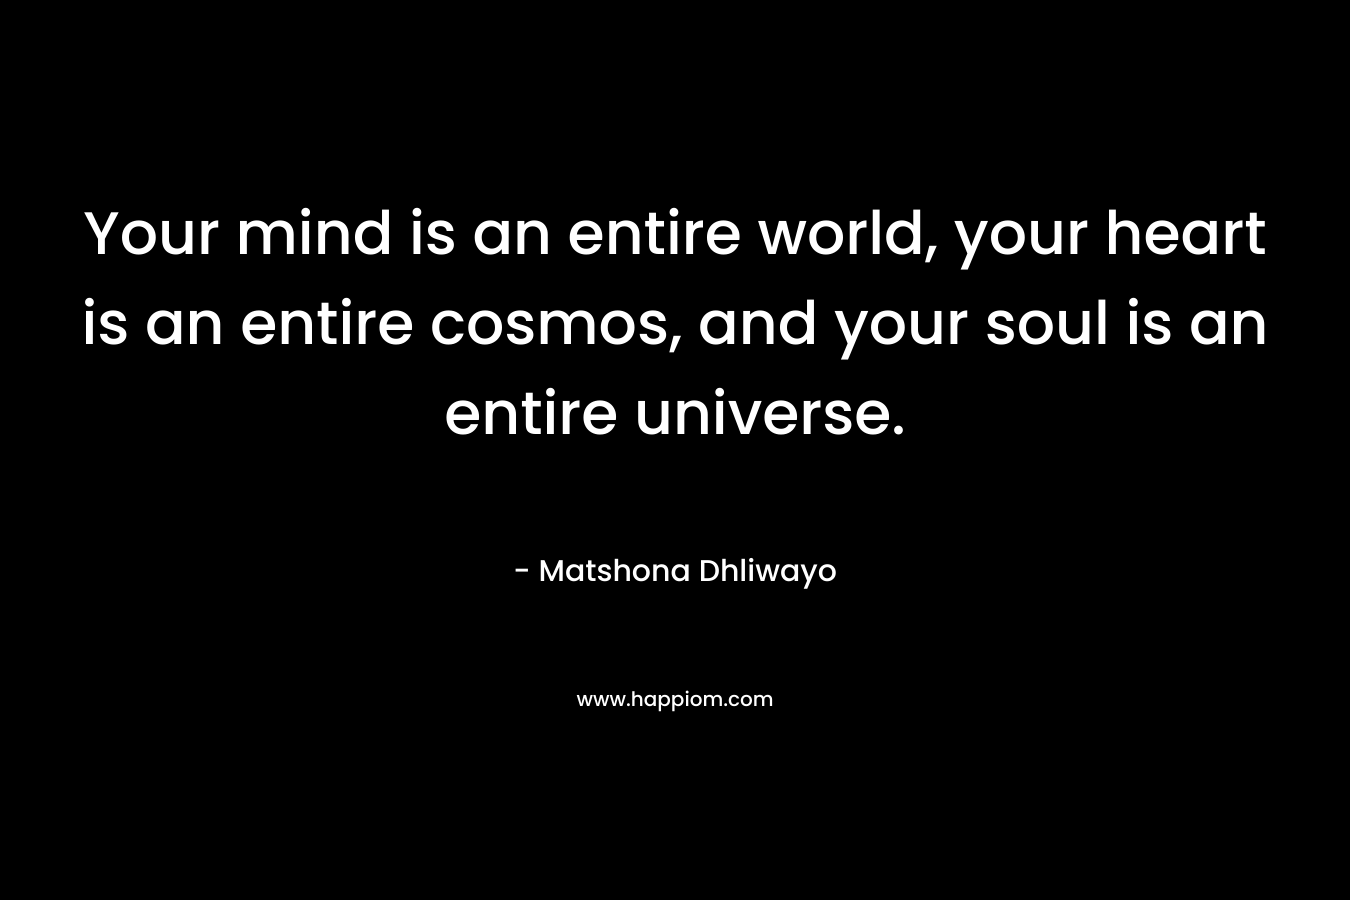 Your mind is an entire world, your heart is an entire cosmos, and your soul is an entire universe.